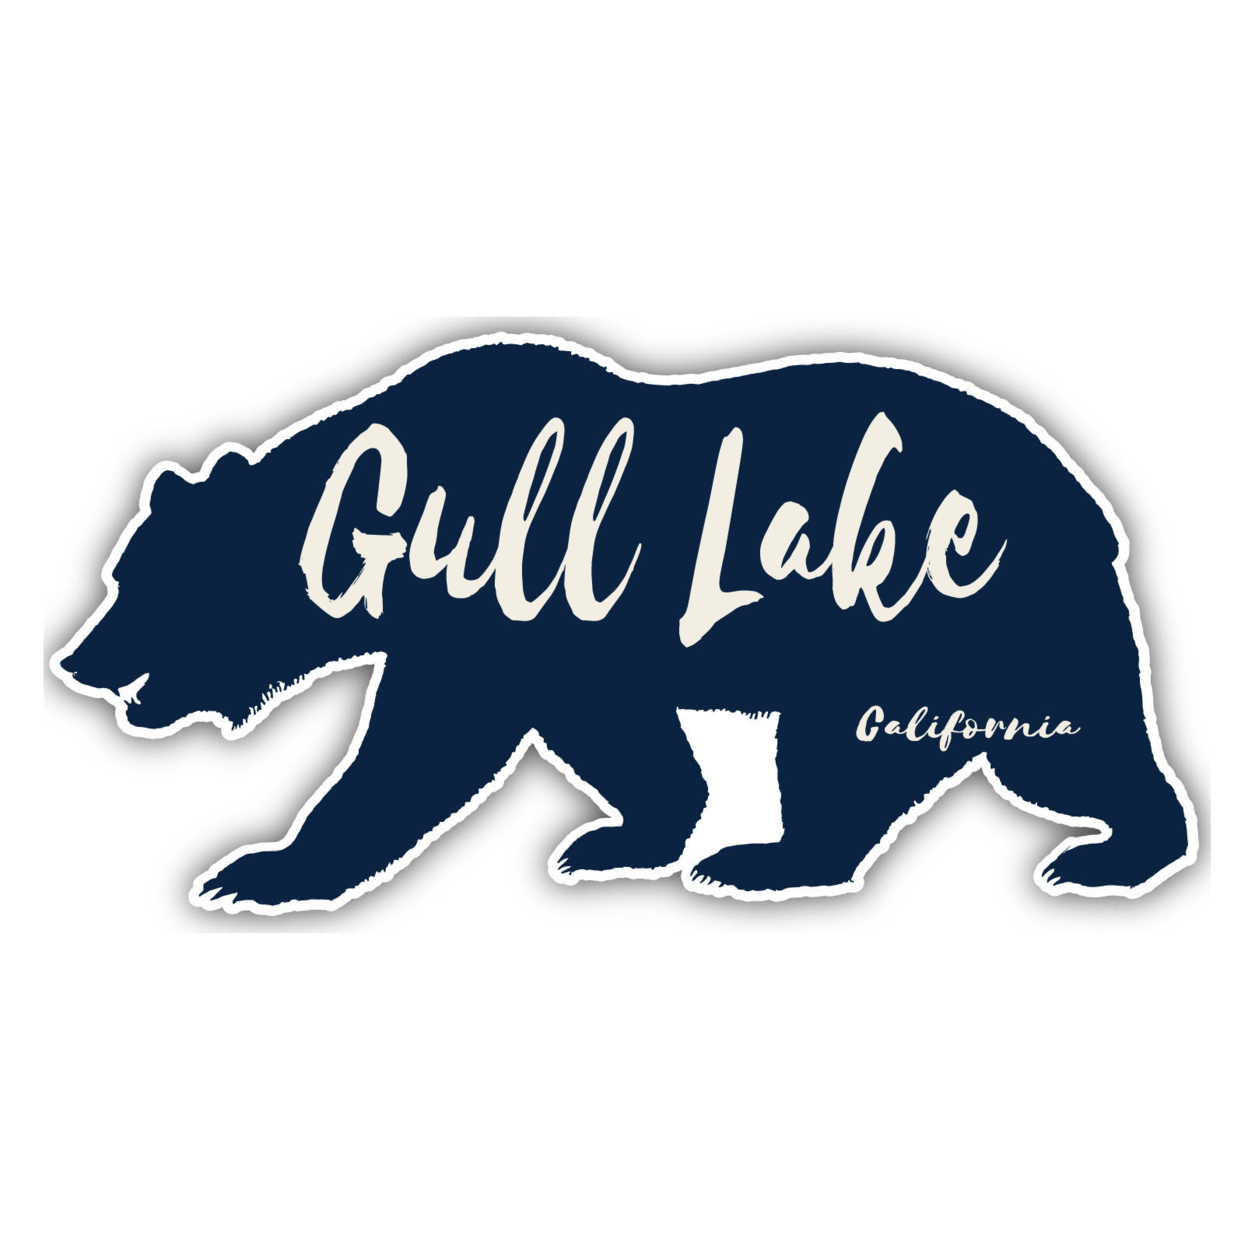 Gull Lake California Souvenir Decorative Stickers (Choose Theme And Size) - 4-Pack, 2-Inch, Tent